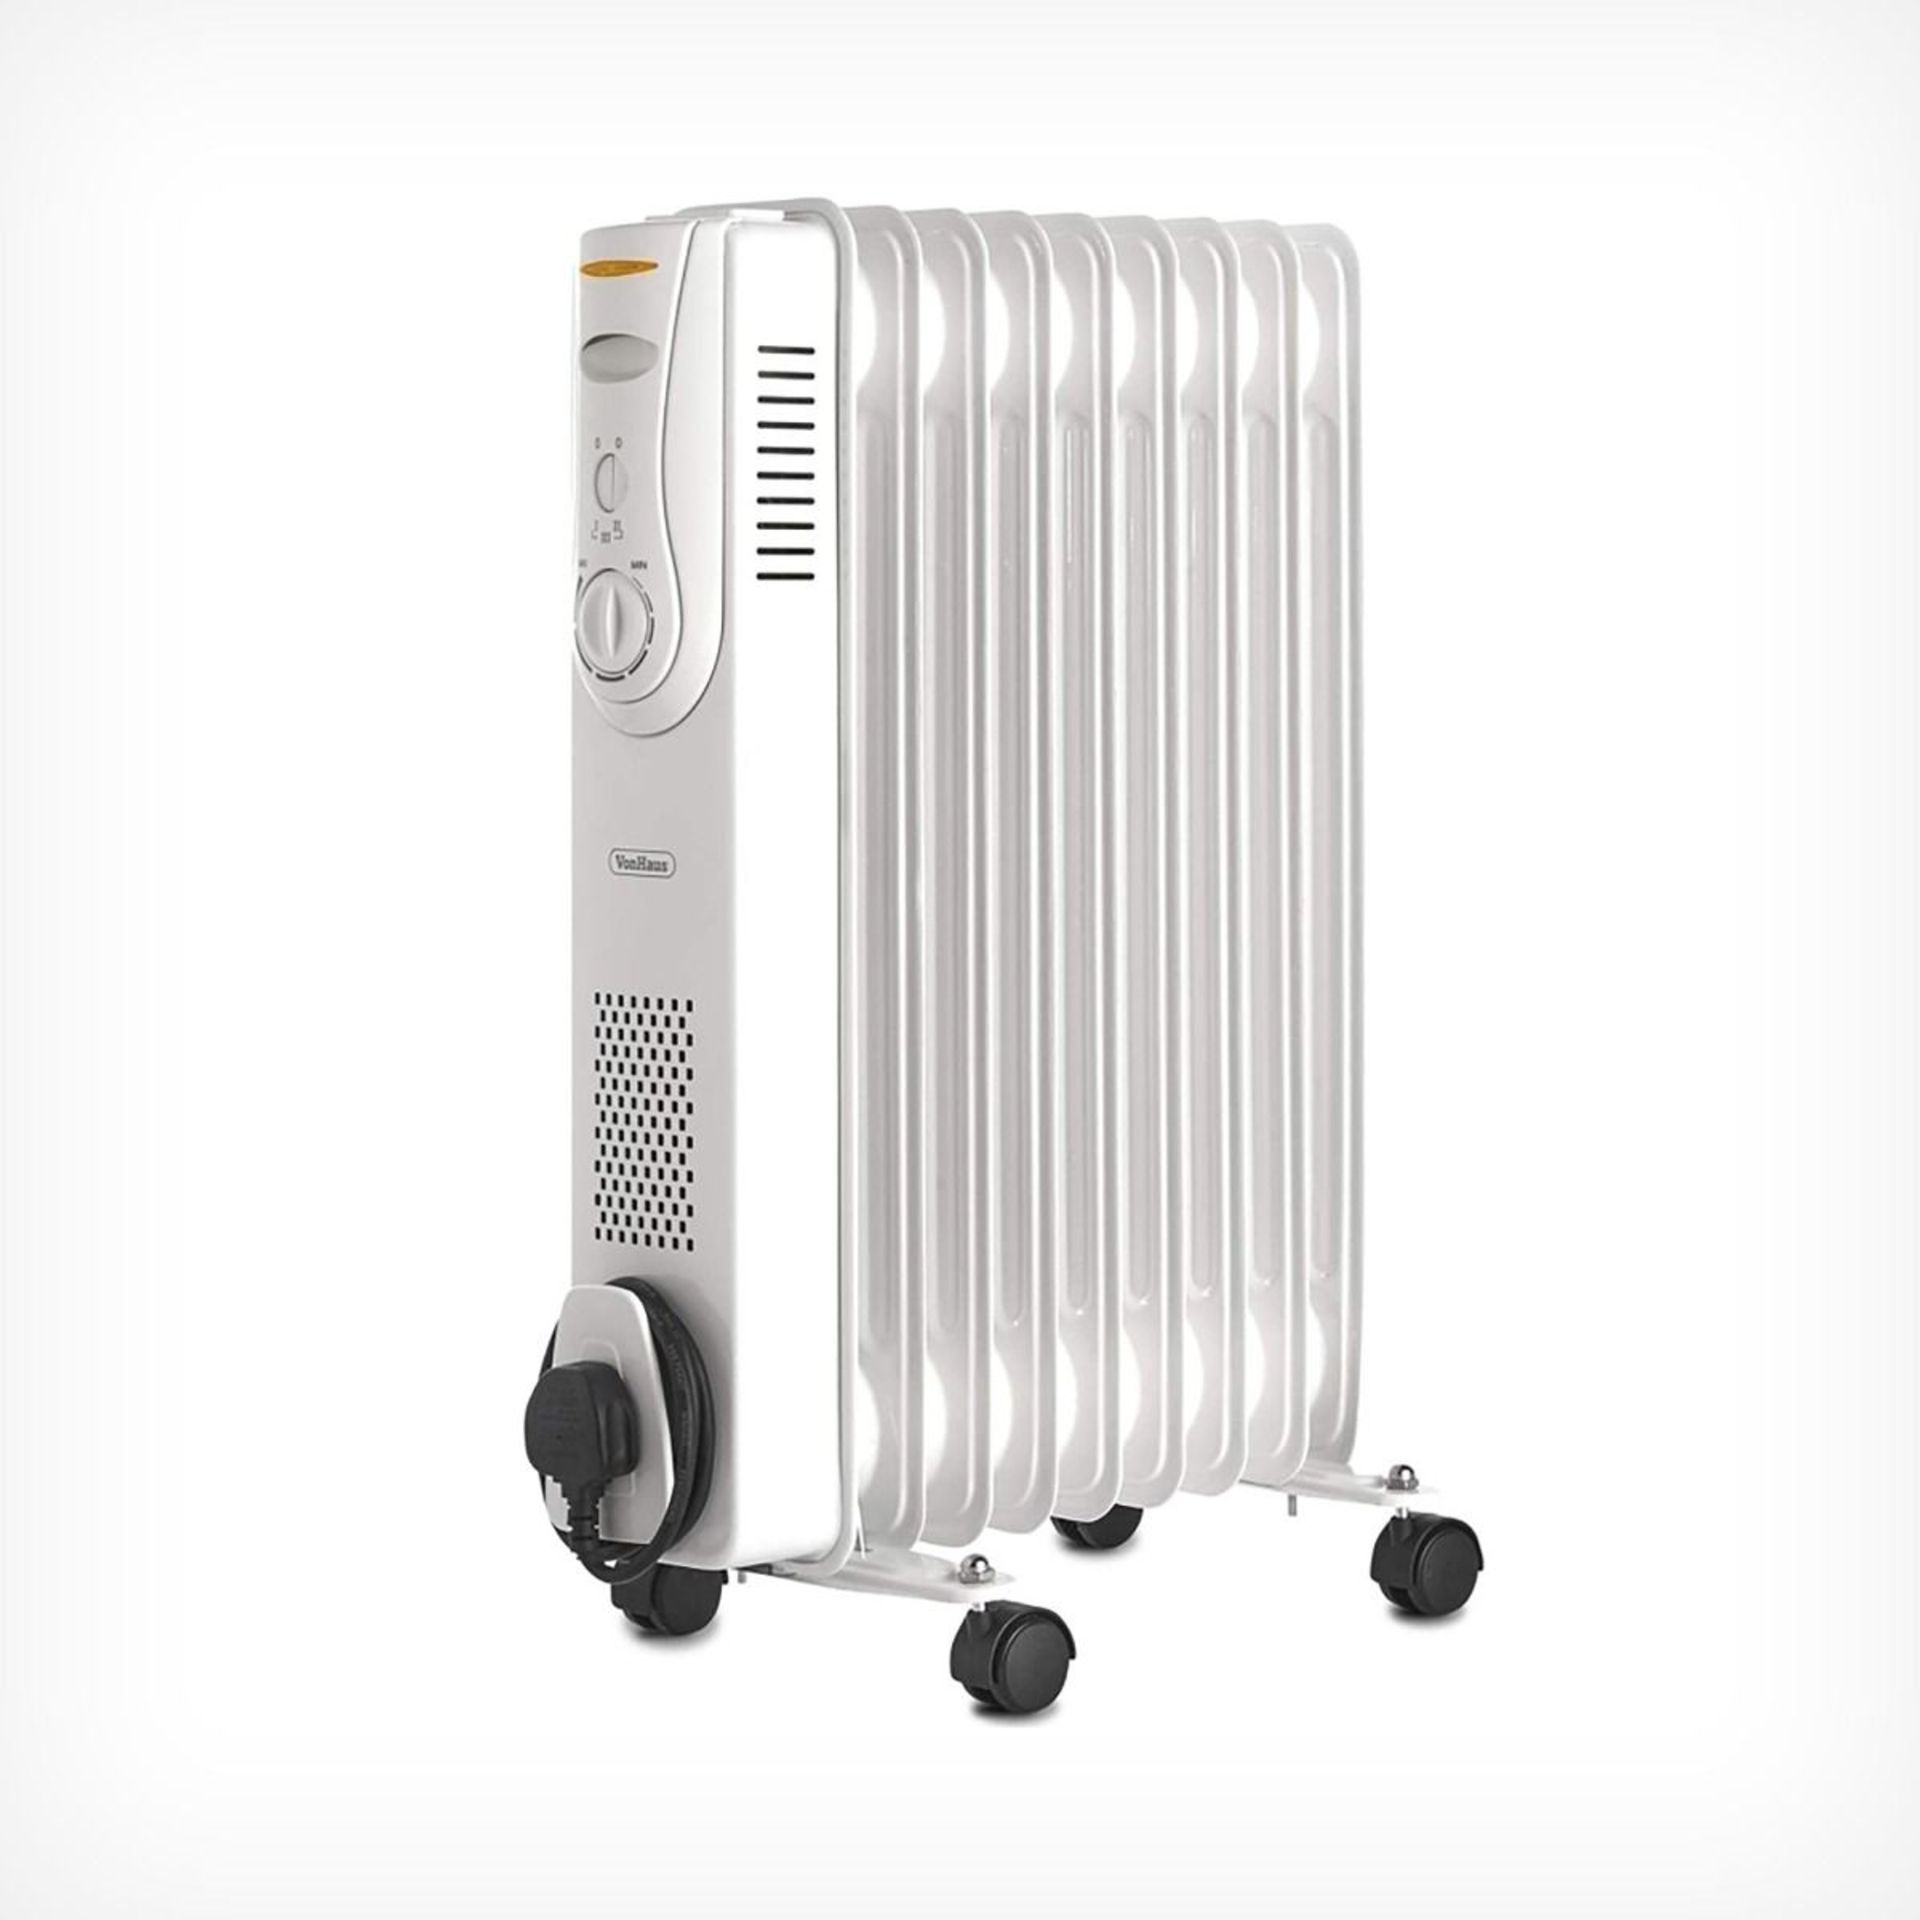 (KG32) 9 Fin 2000W Oil Filled Radiator - White. Equipped with 3 heat settings (800W/1200W/2000W... - Image 2 of 4